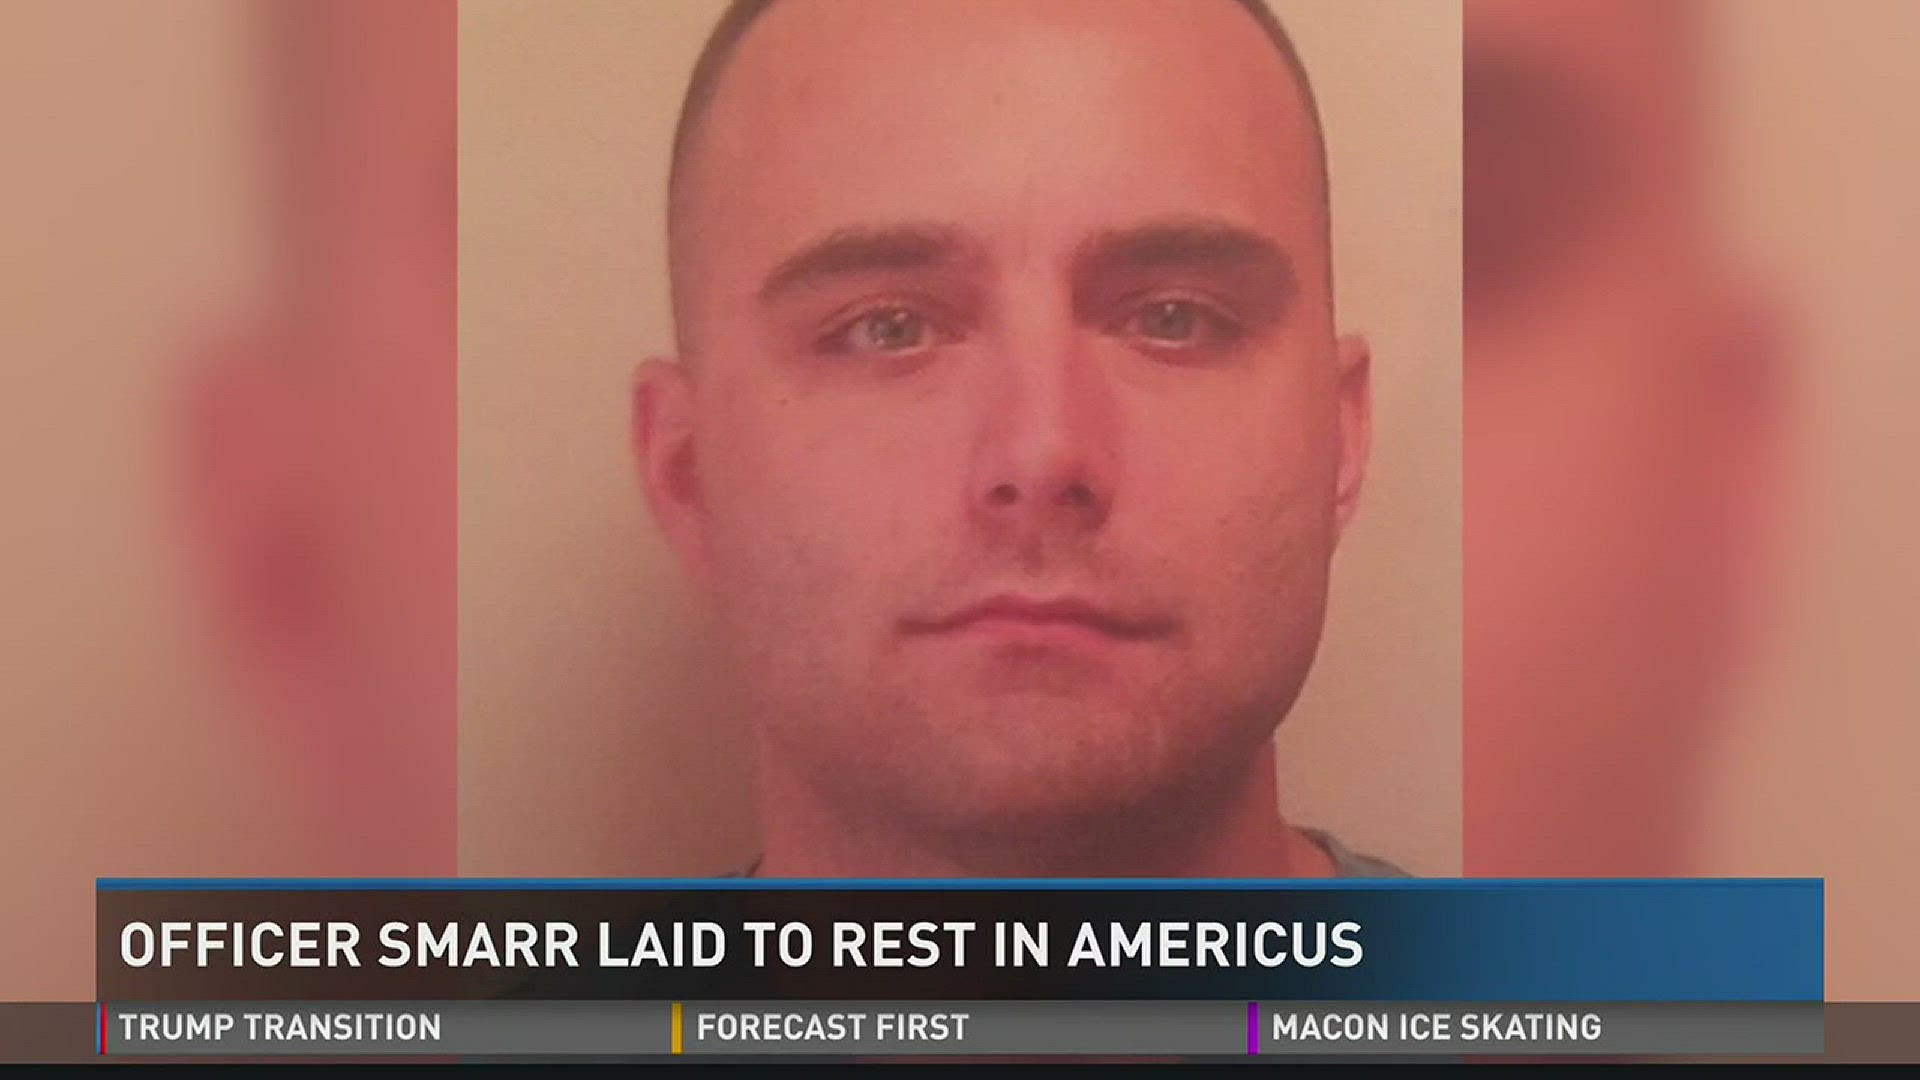 Officer Smarr laid to rest in Americus